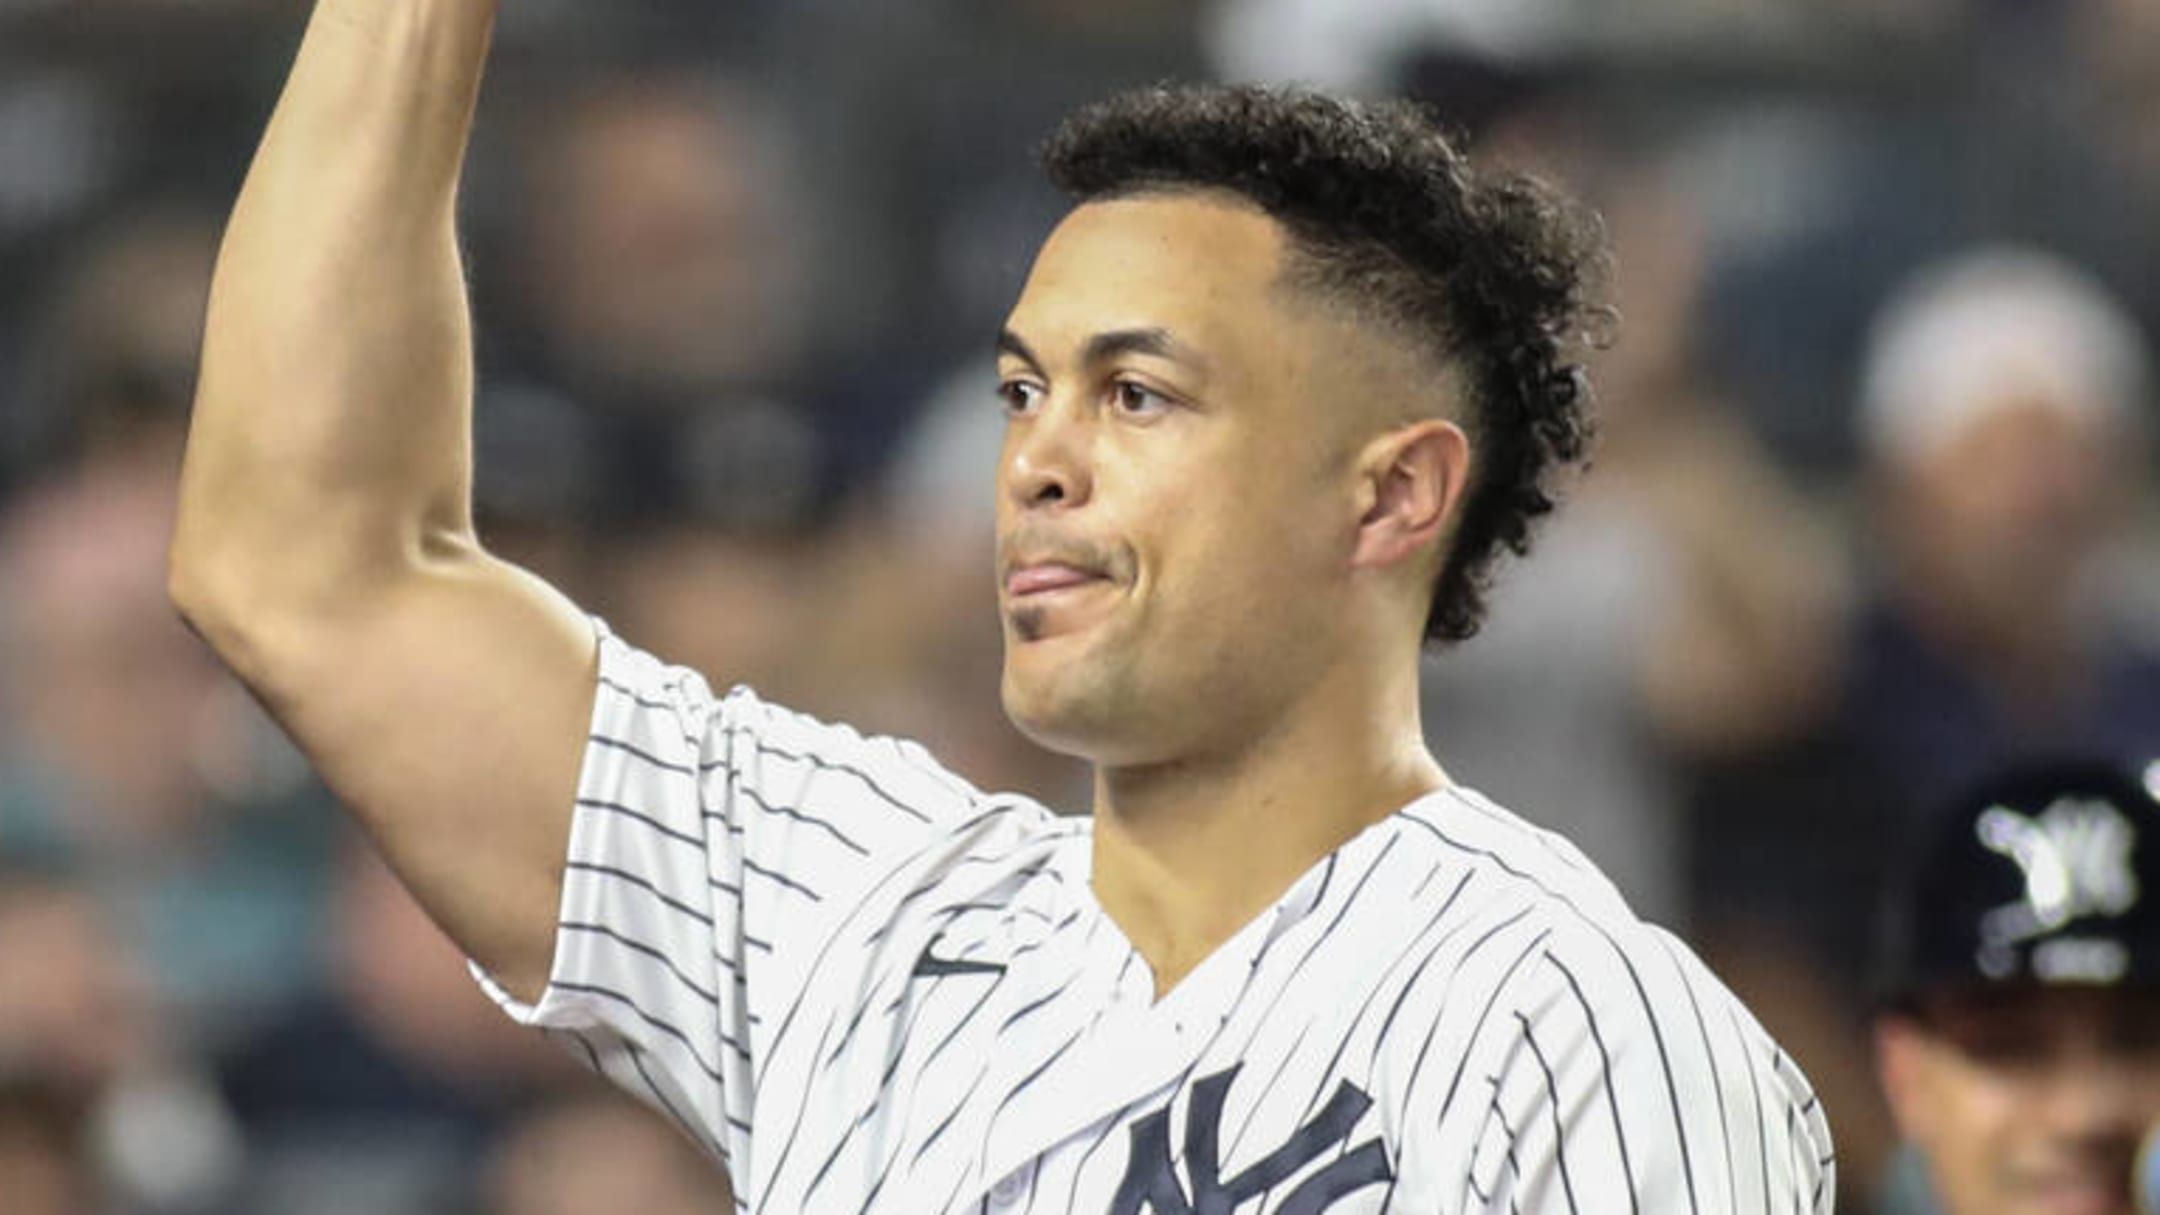 Stanton milestone sparks 'what if' discussion about career